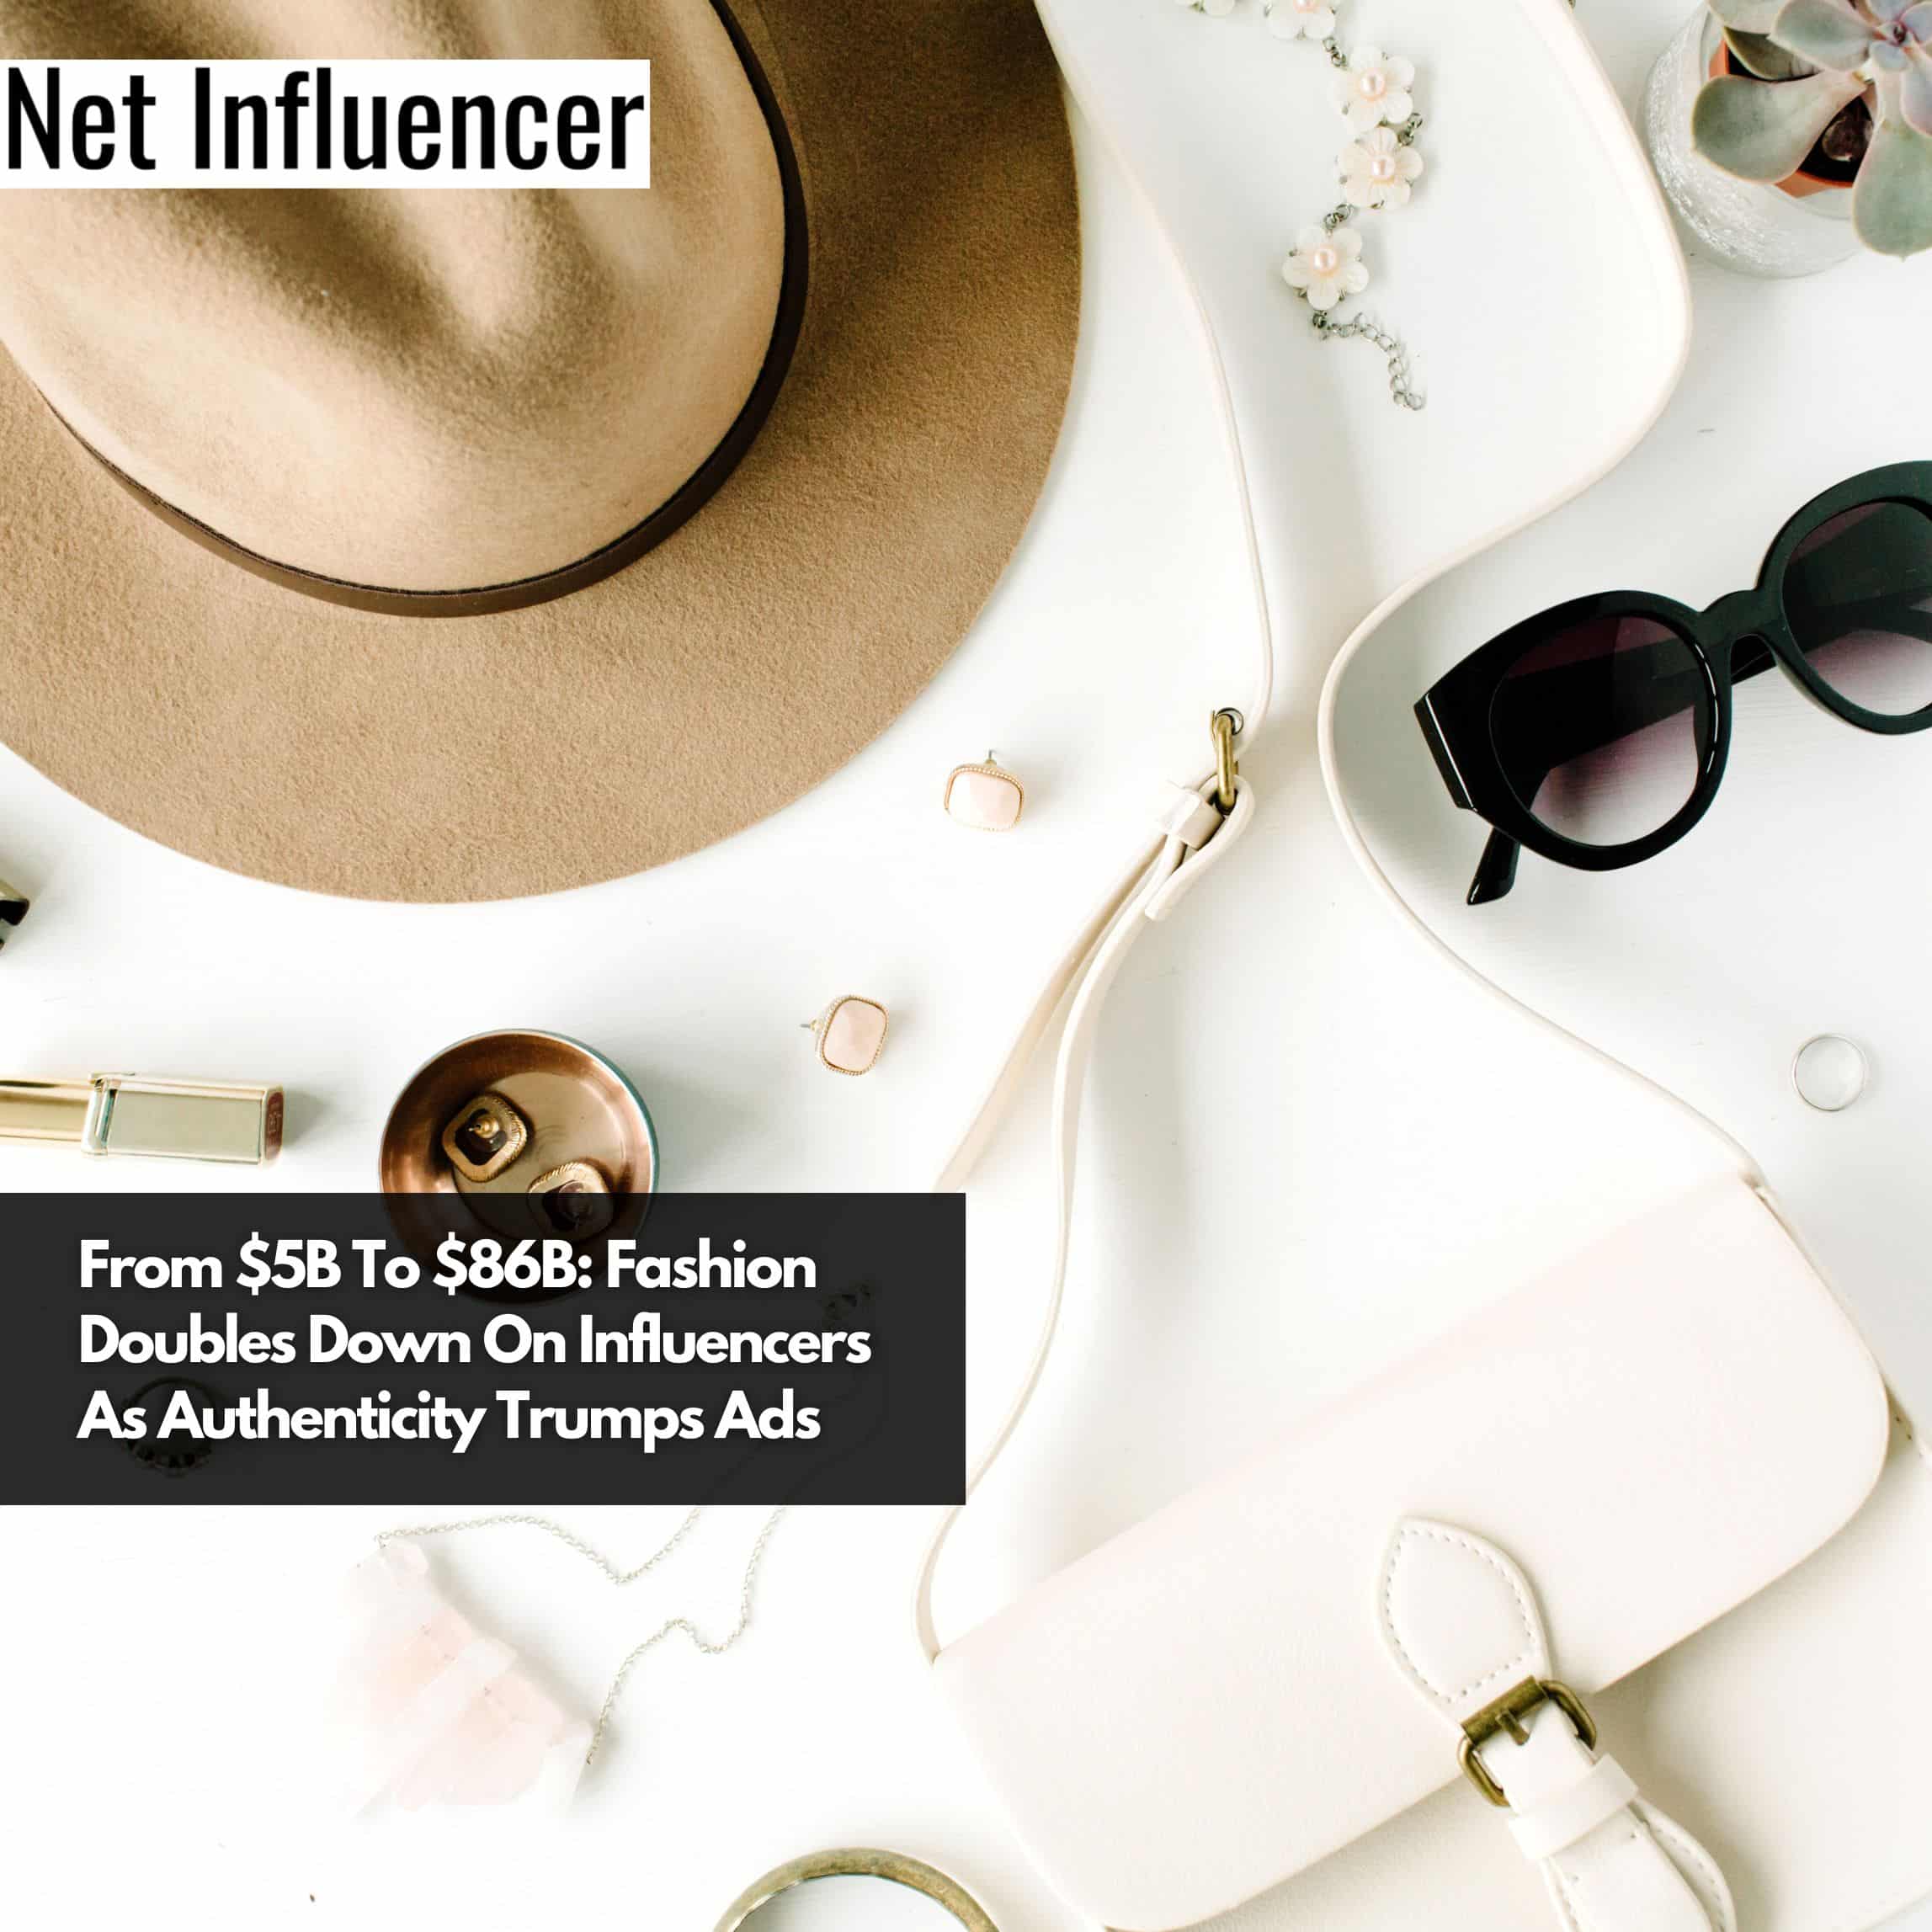 From $5B To $86B Fashion Doubles Down On Influencers As Authenticity Trumps Ads